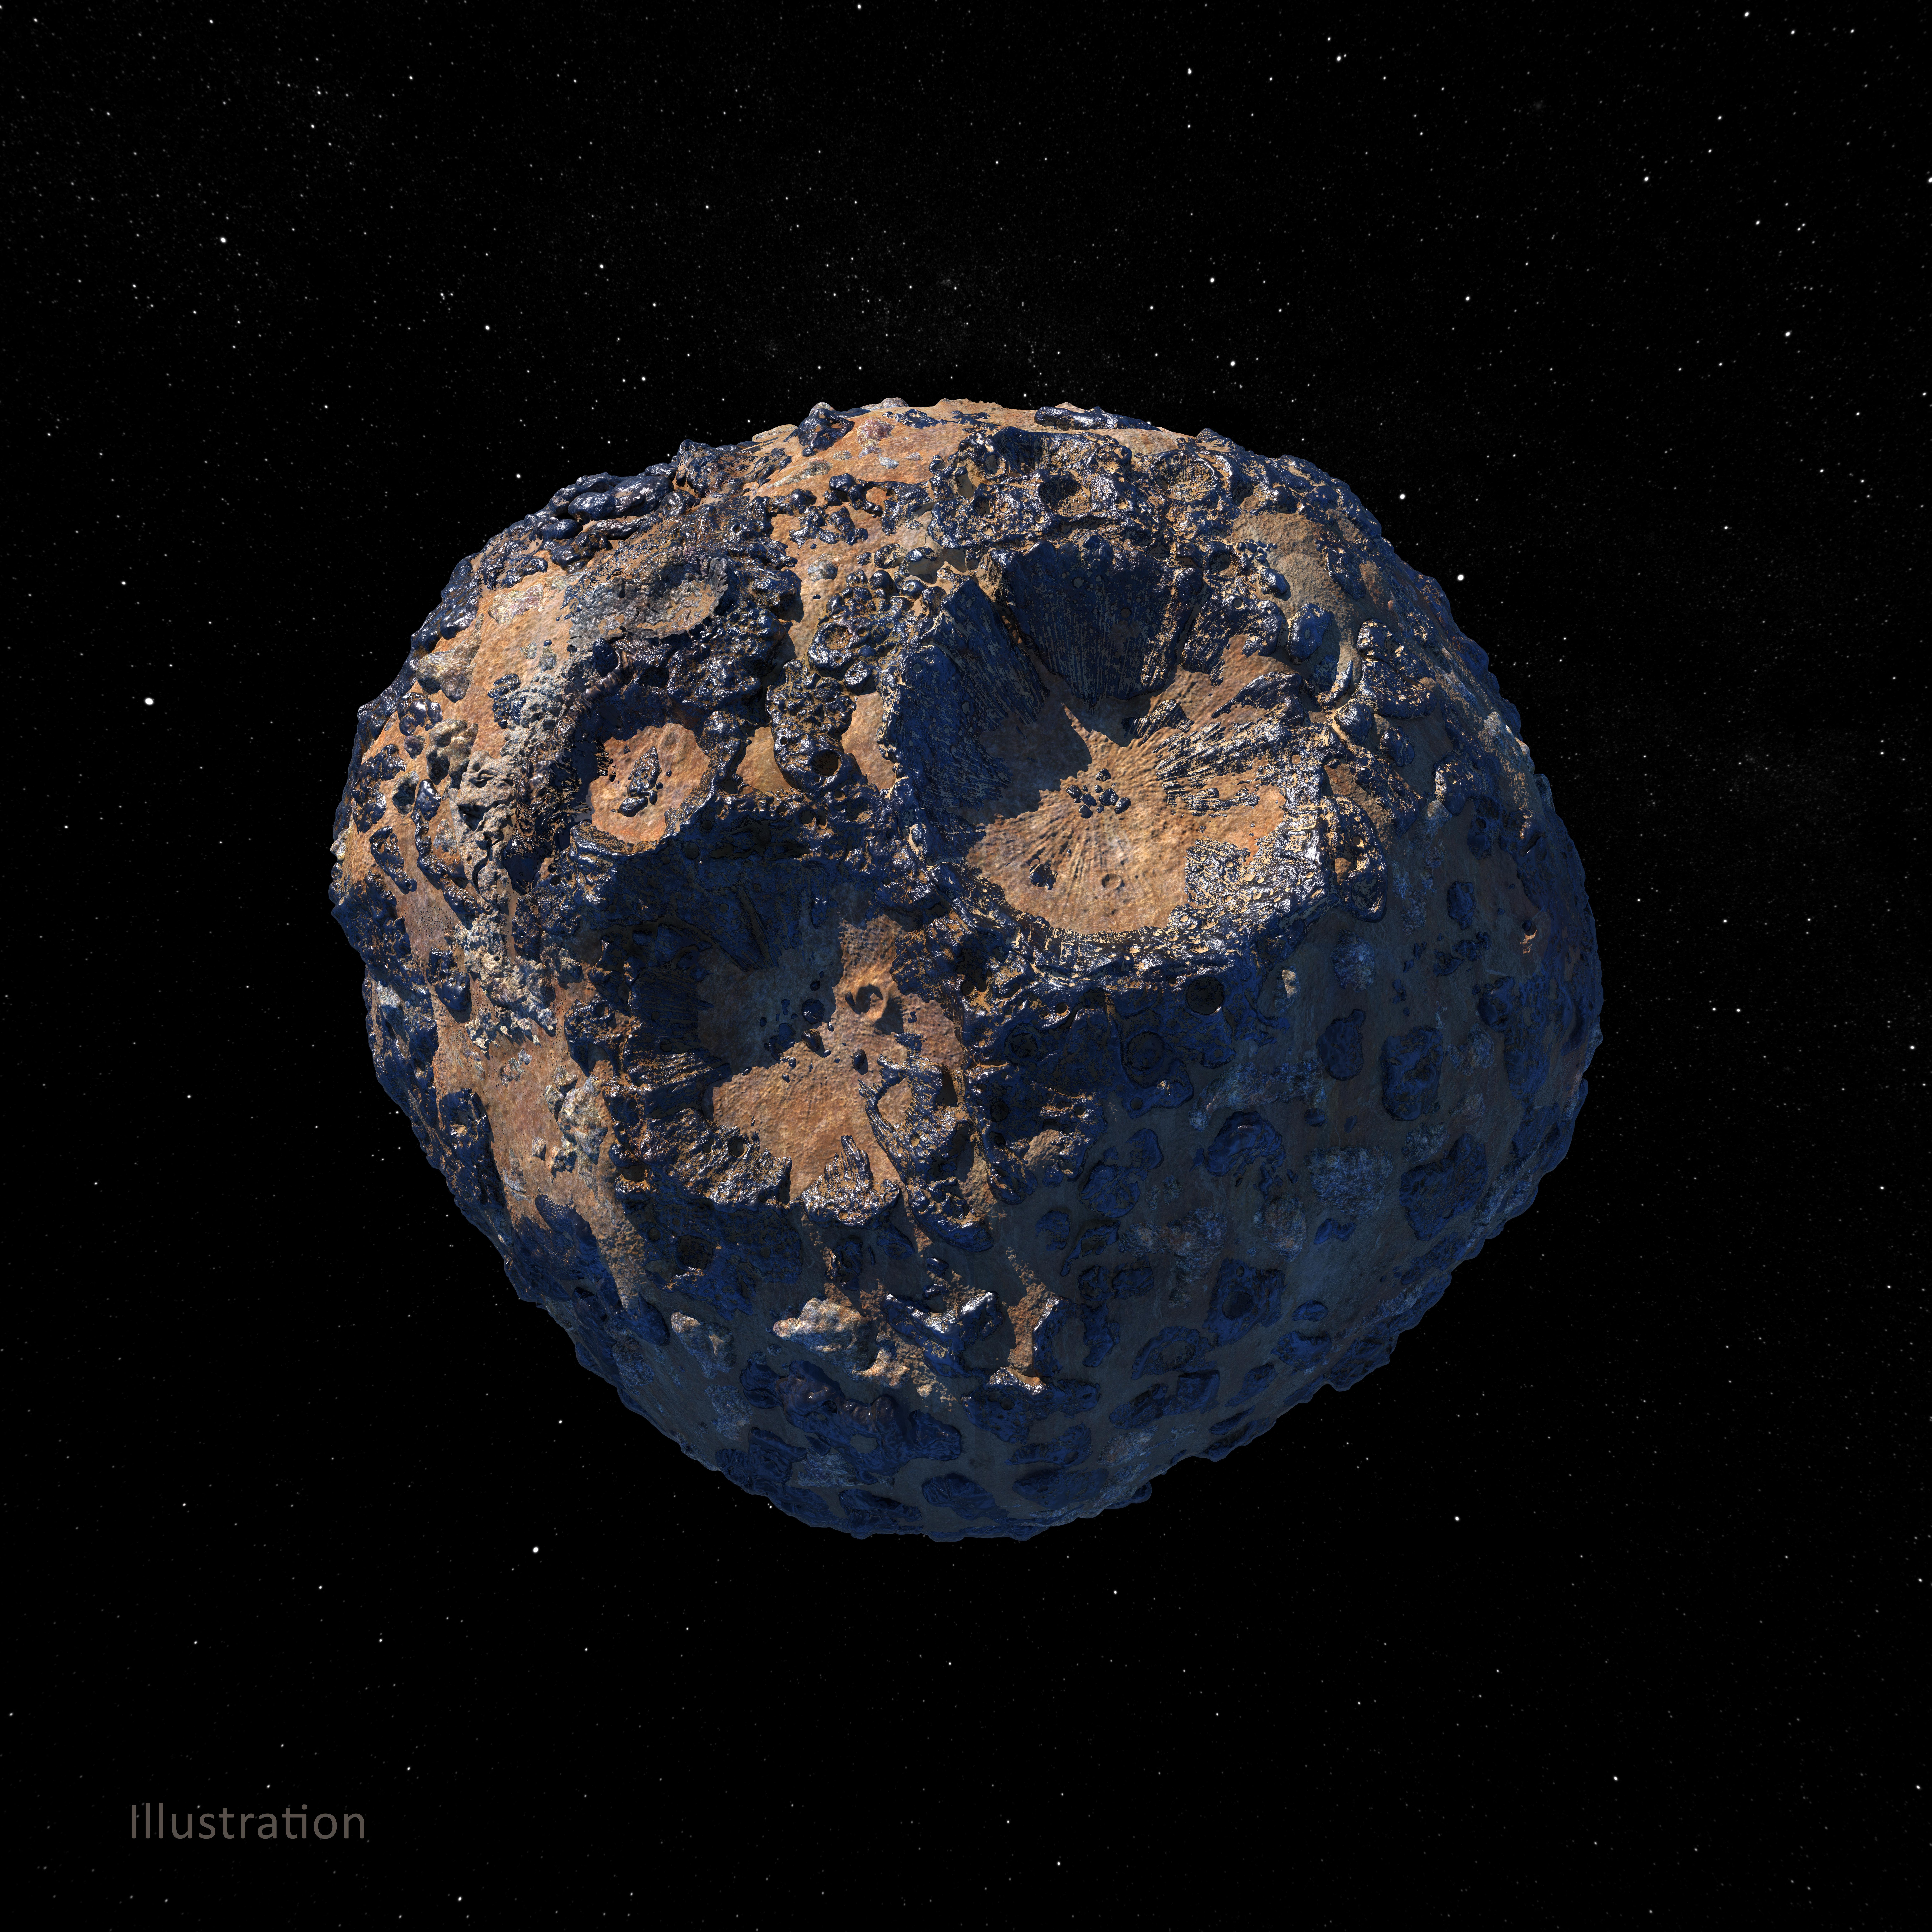 Clues to Psyche Asteroid’s Metallic Nature Found in SOFIA Data